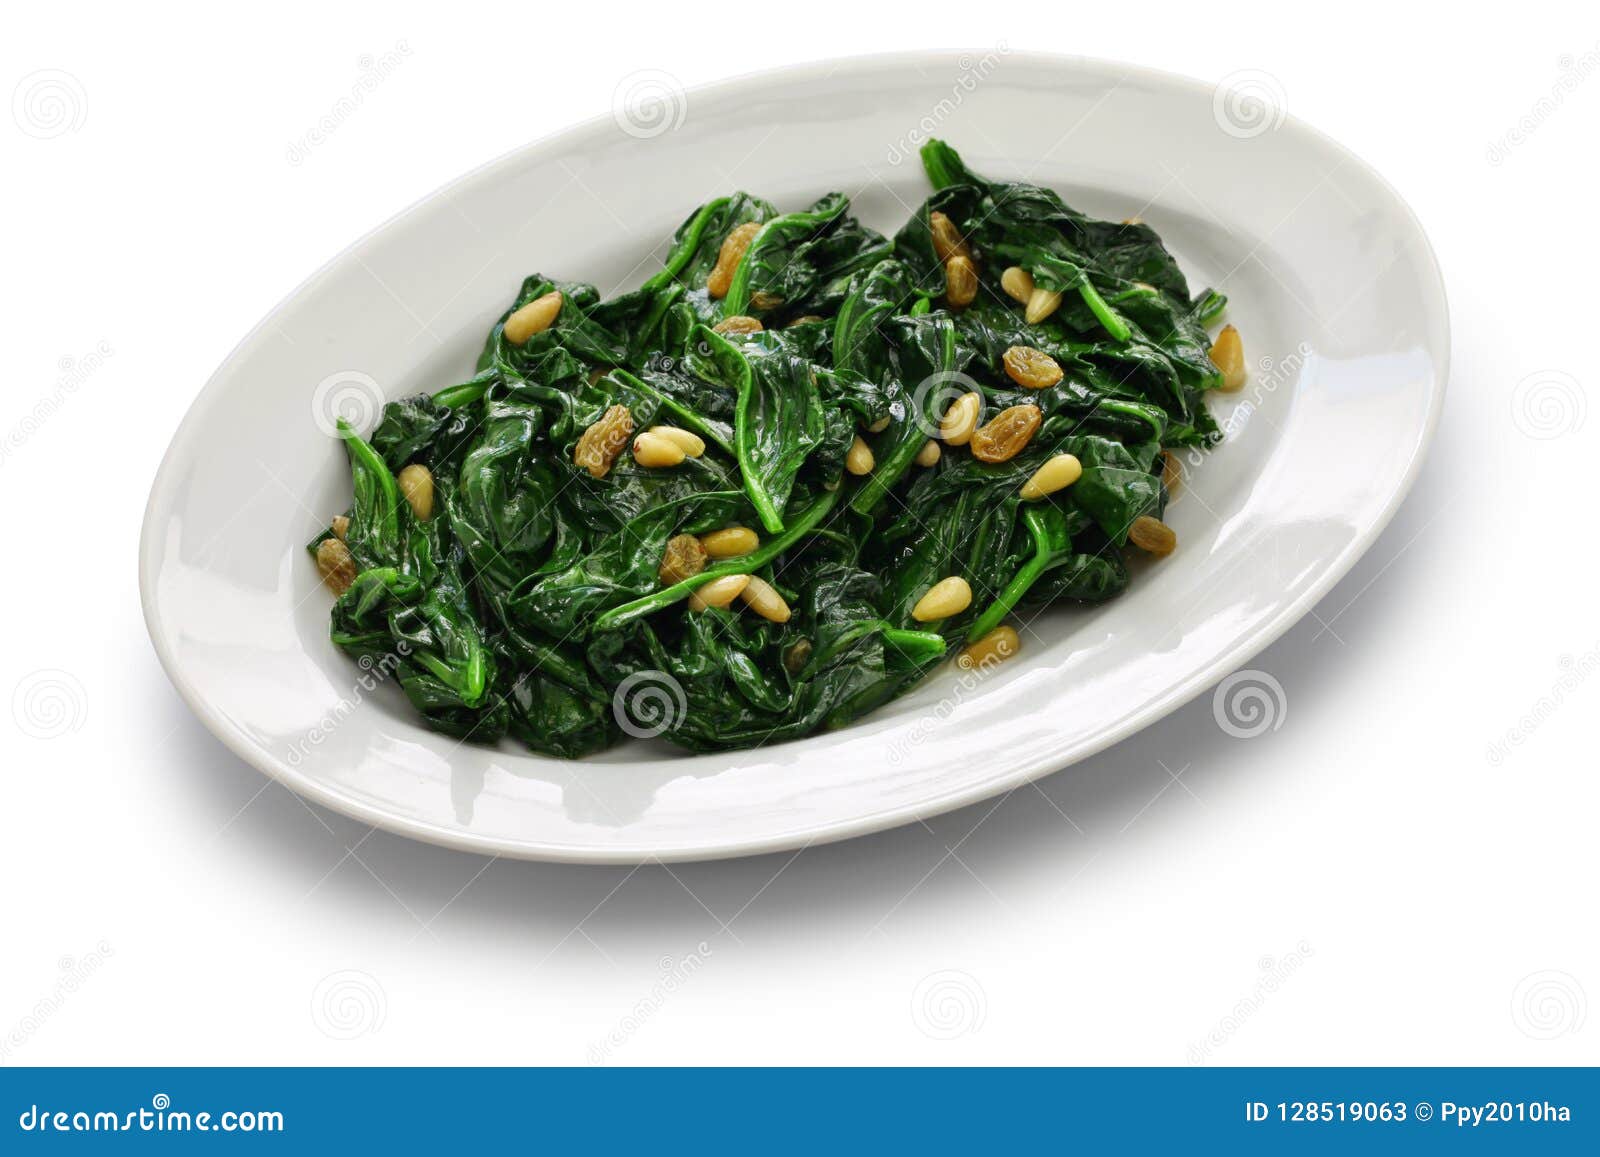 sauteed spinach with raisins and pine nuts, catalan spinach